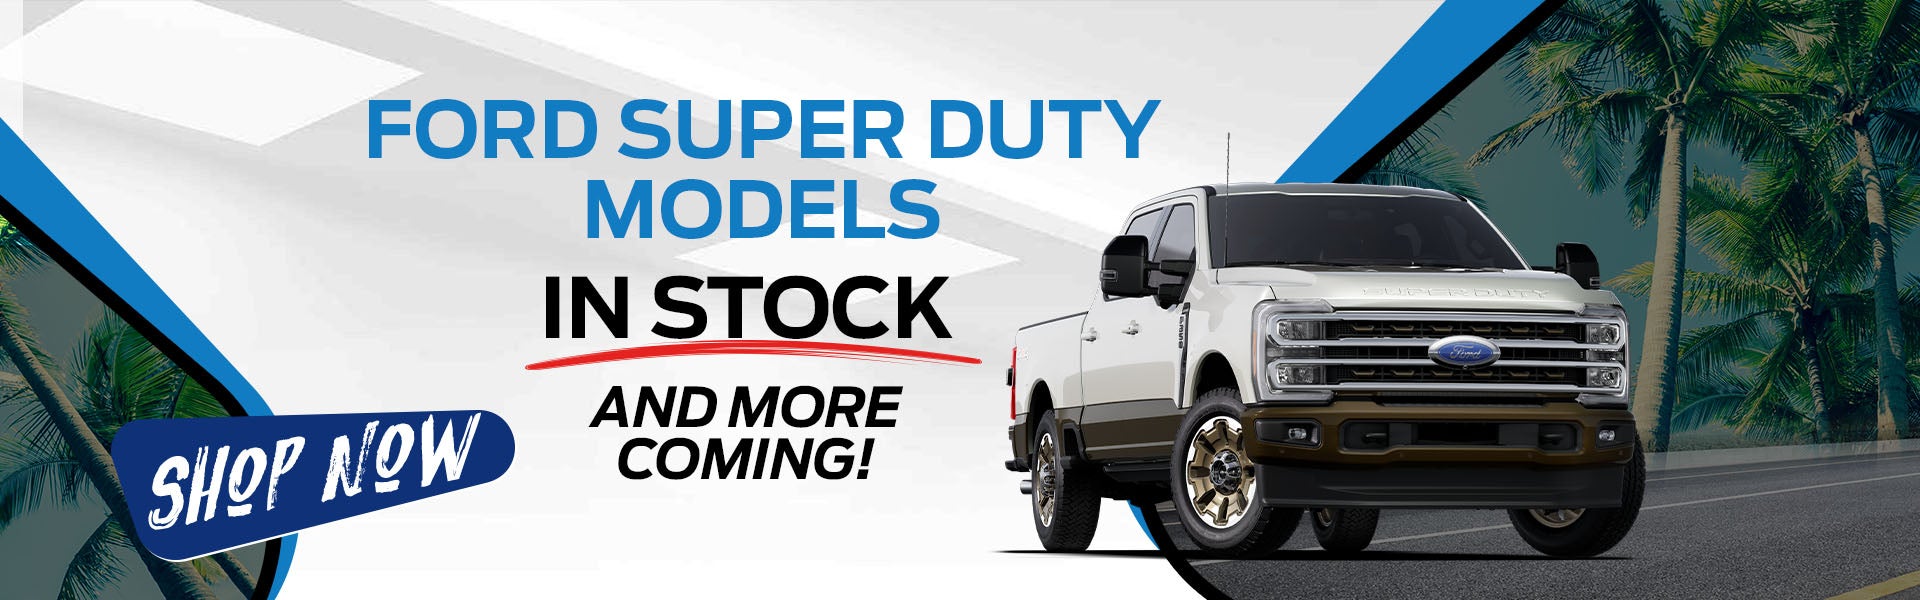 Ford Super Duty models in stock